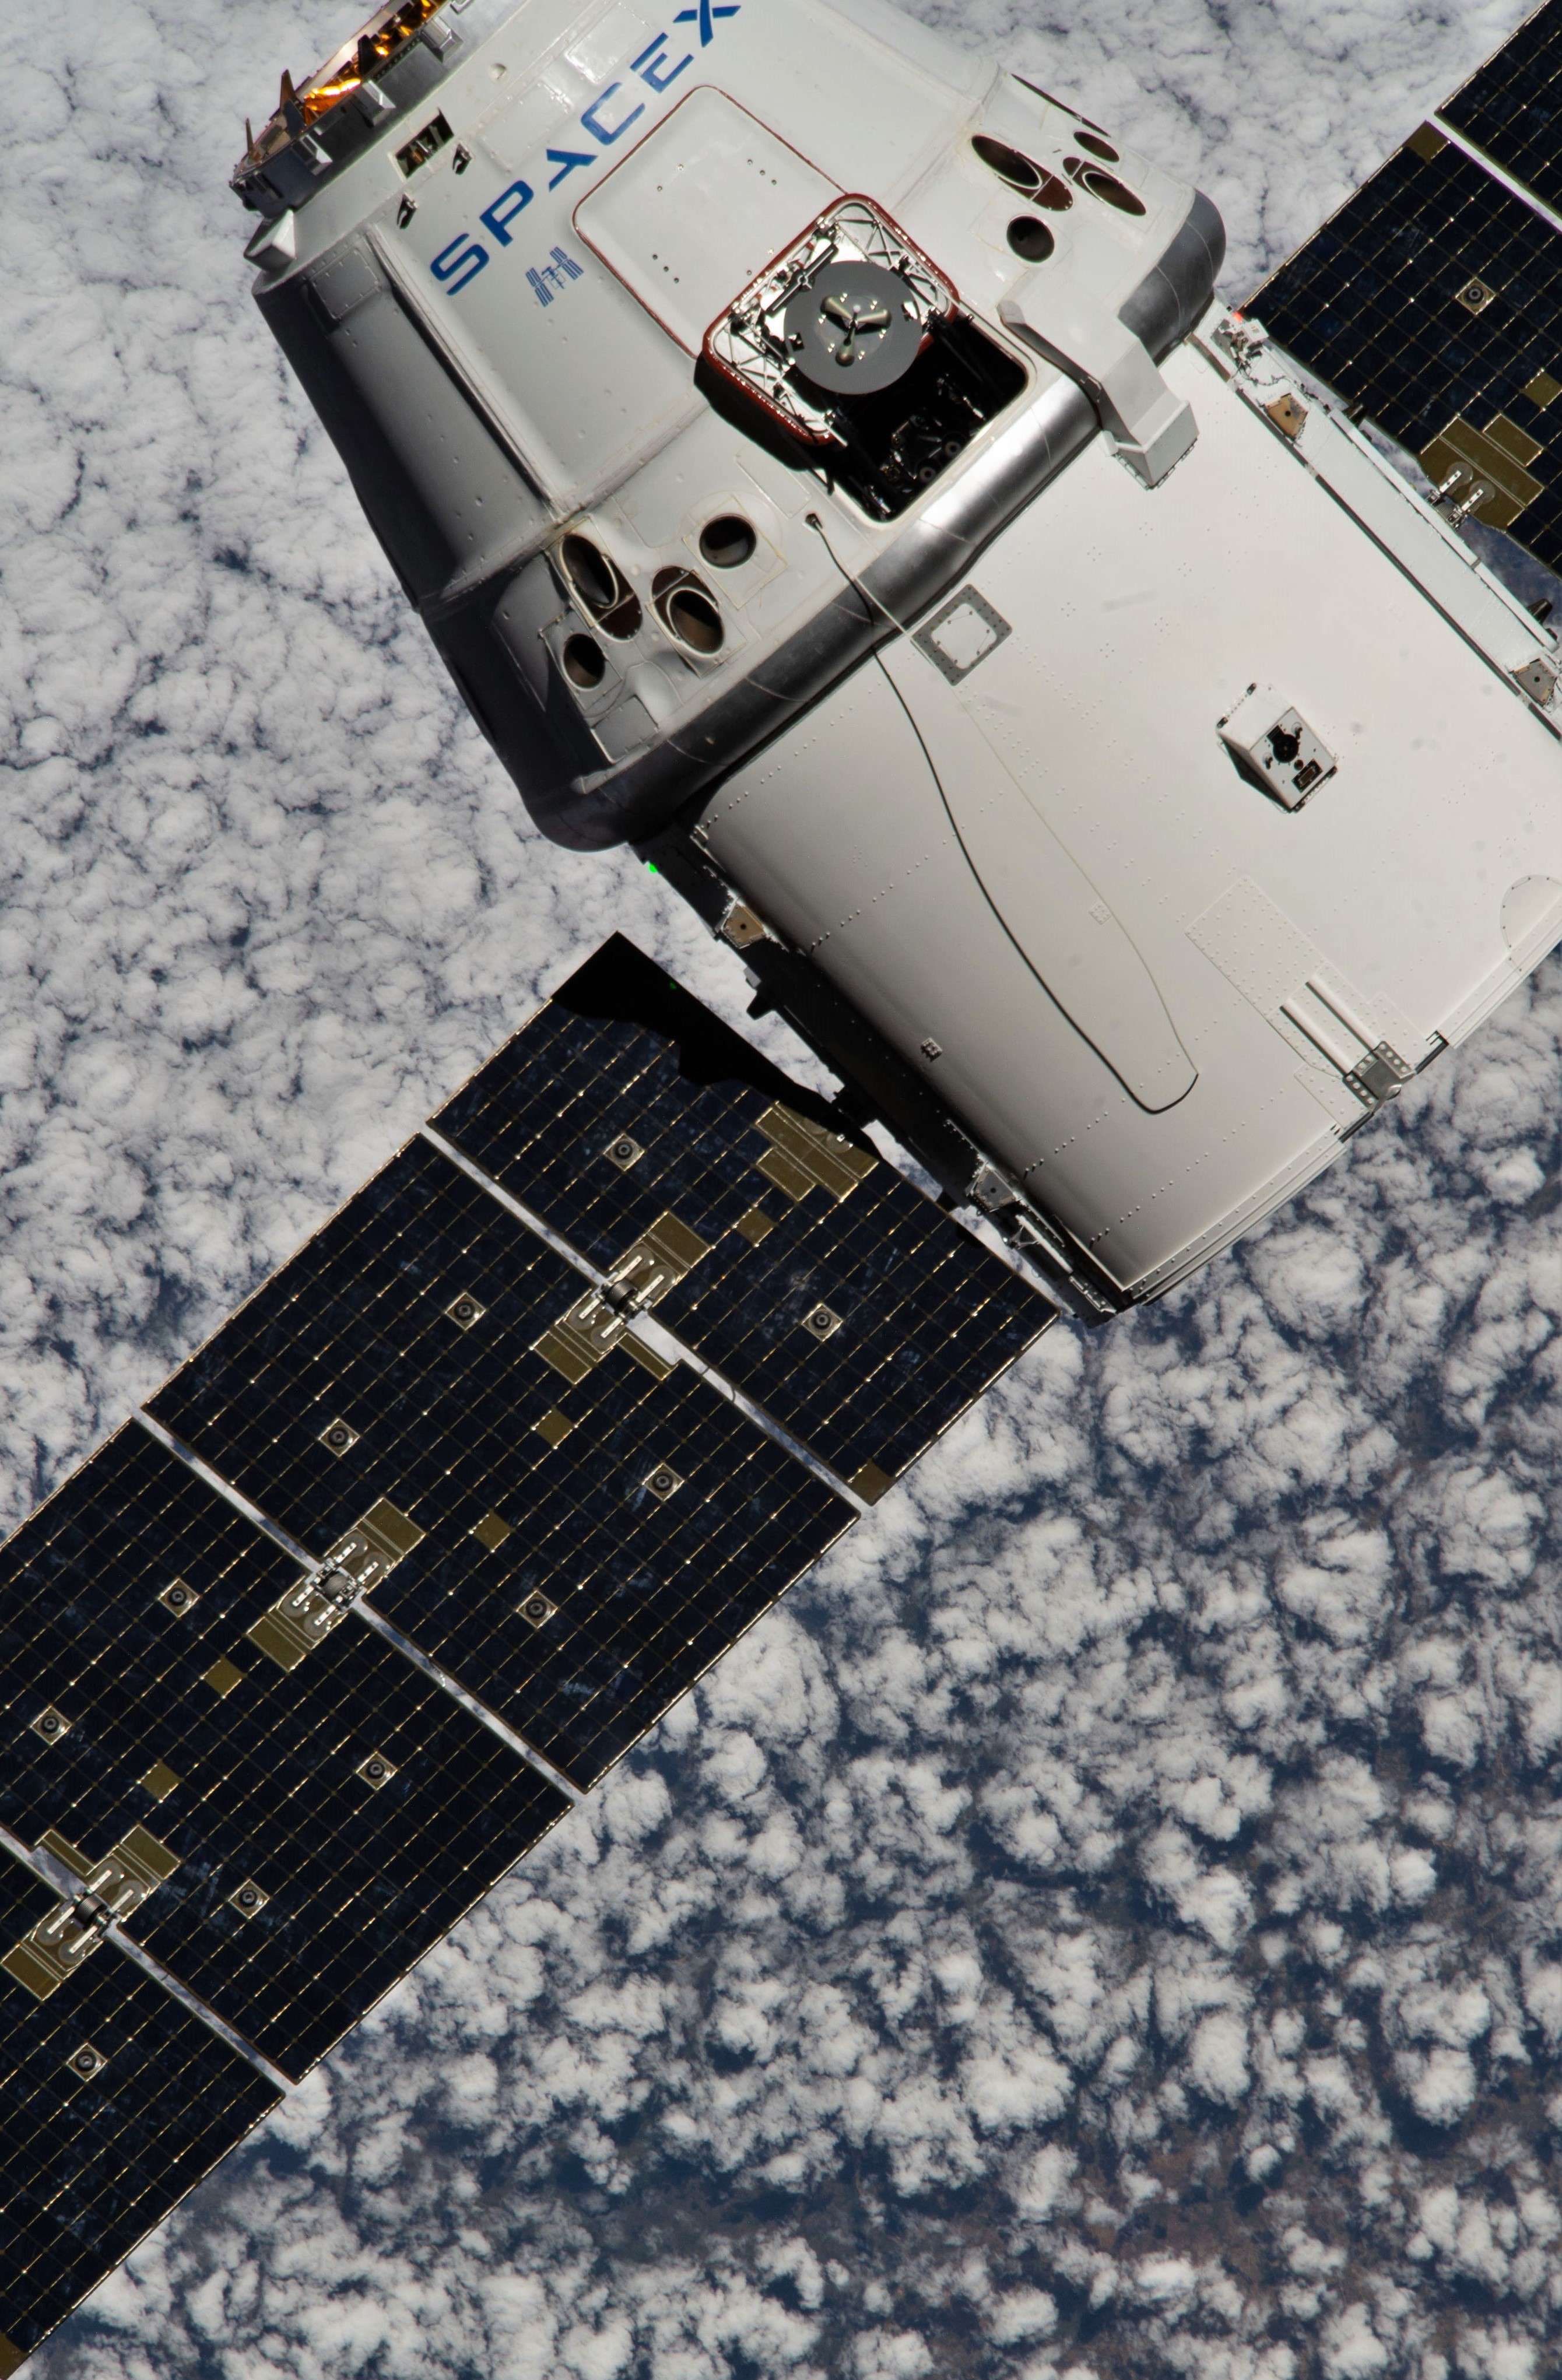 Cargo Dragon C113 CRS-17 ISS arrival 050619 (NASA) 1 crop (c)